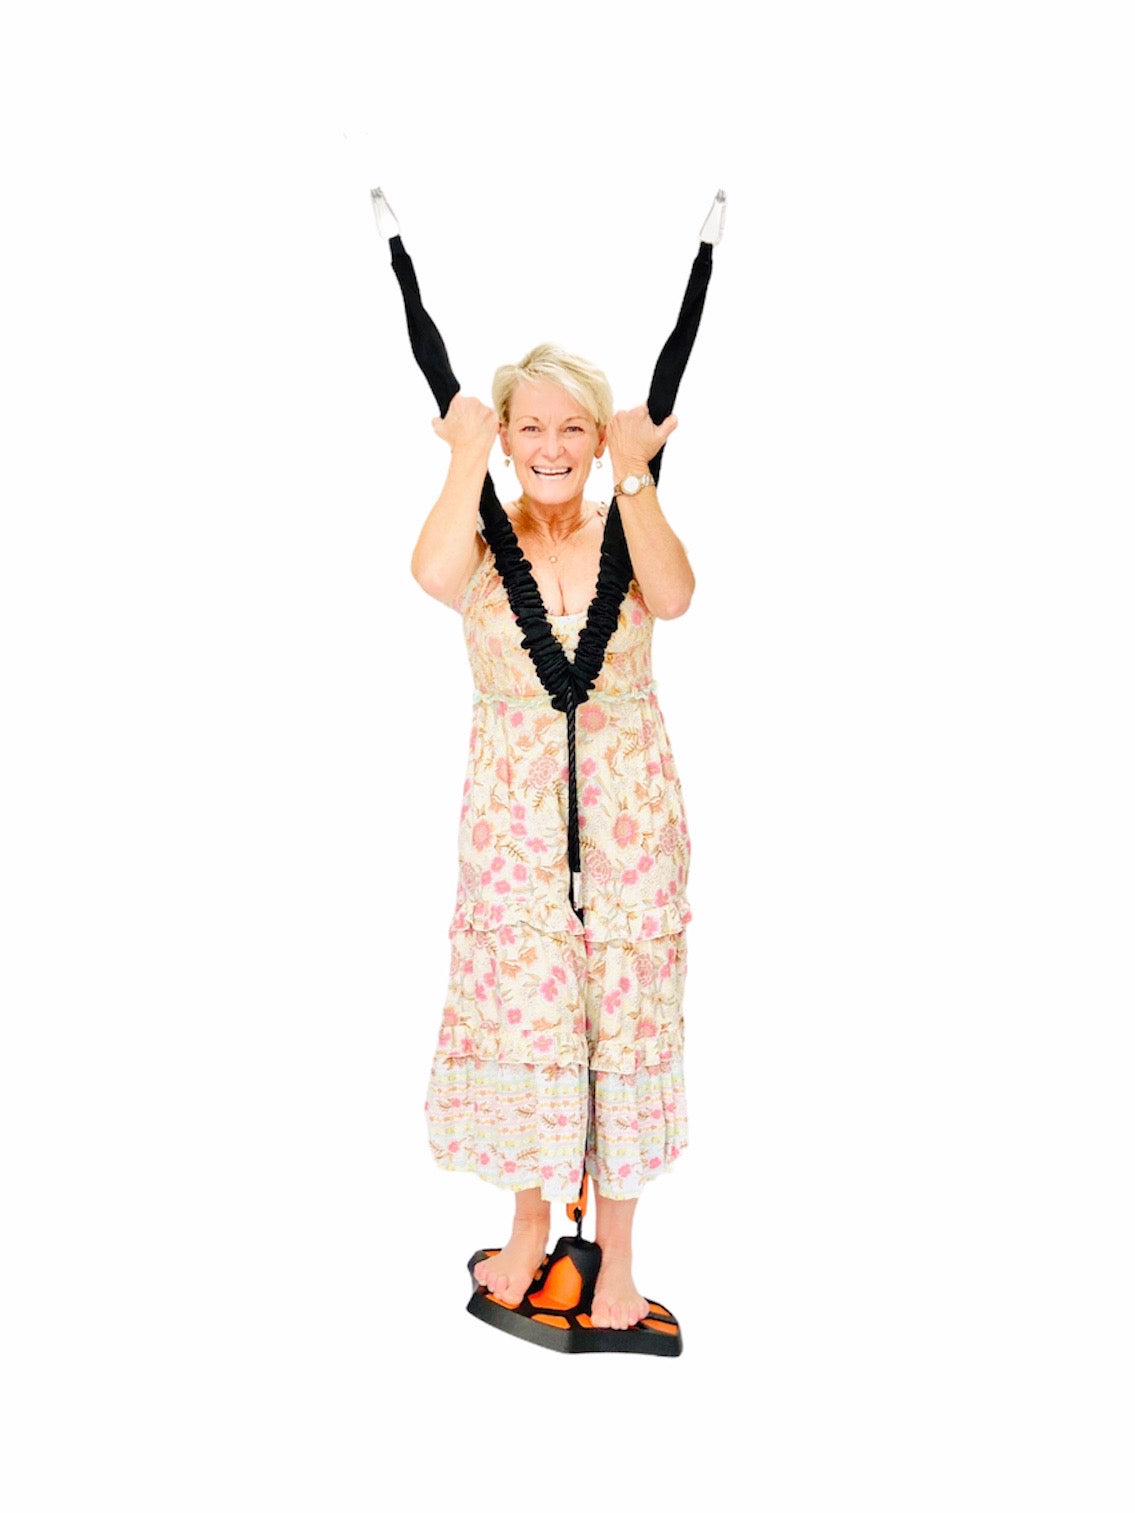 woman bouncing the Vuly Bounce Swing with Bungee